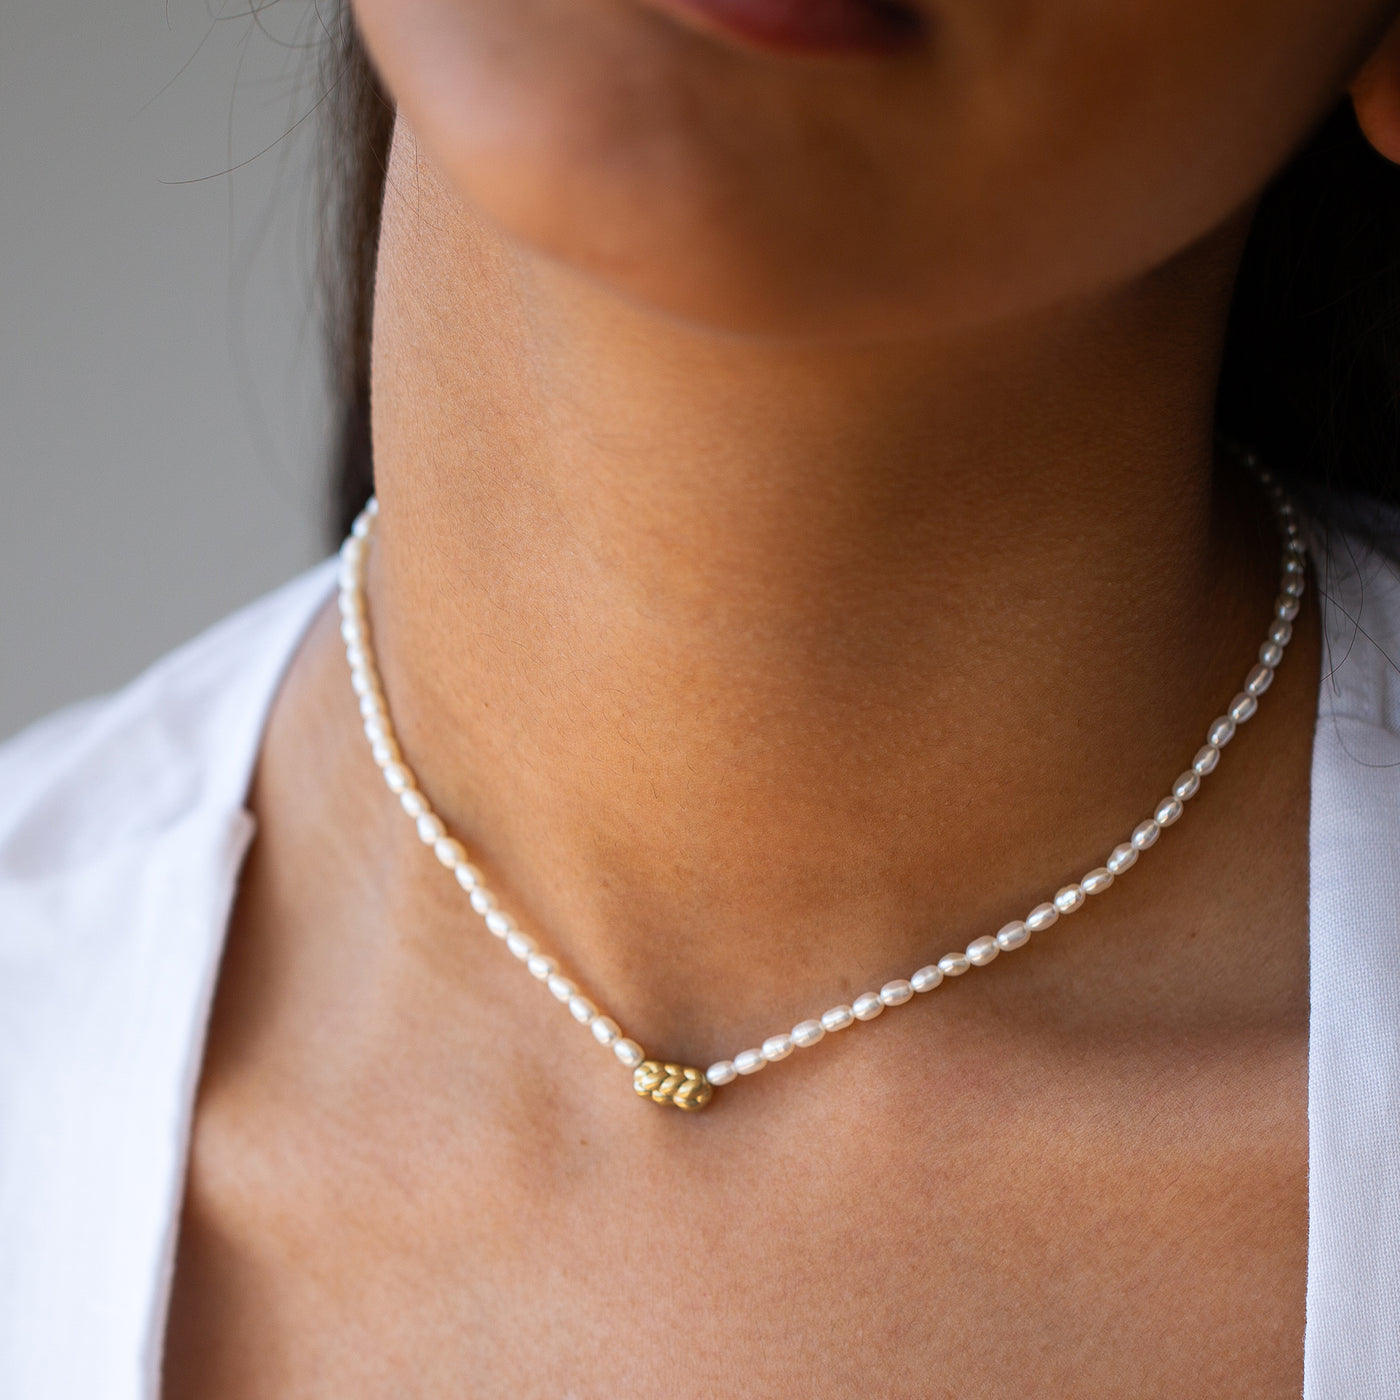 14K Gold and pearls necklace with a Challah pendant